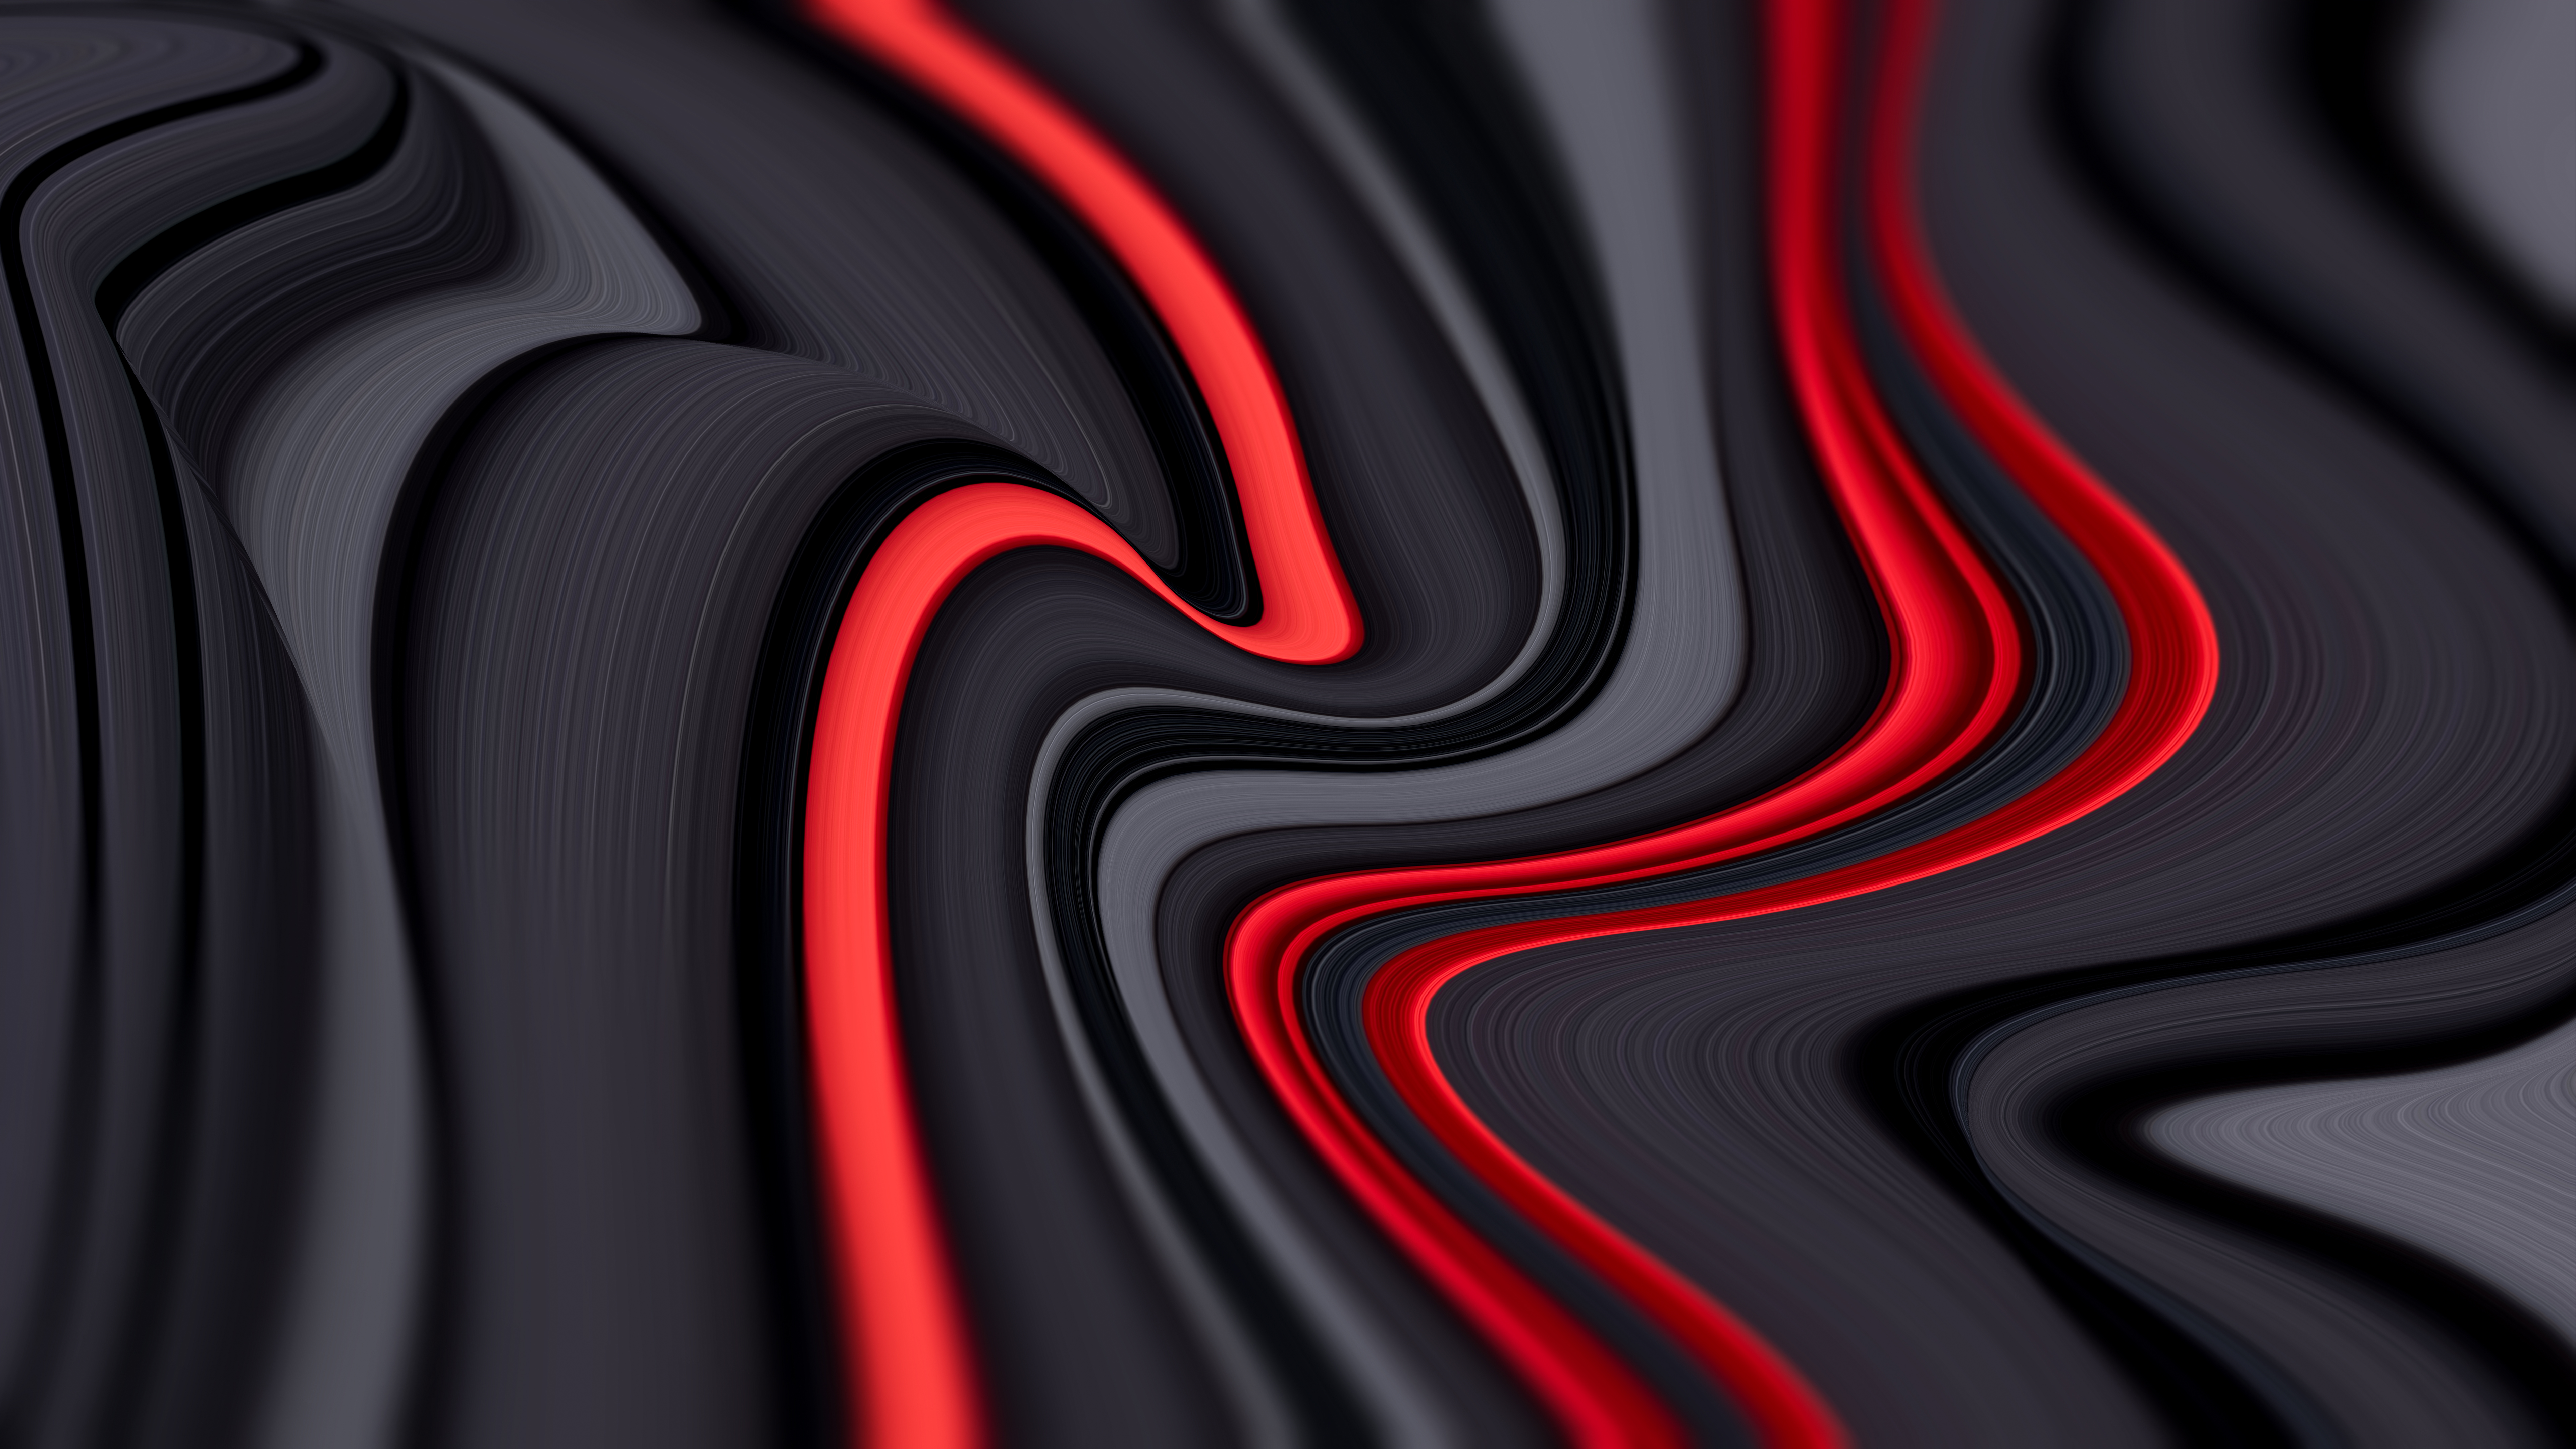 Abstract wallpaper in 8k stock photo. Image of resolution - 252883884